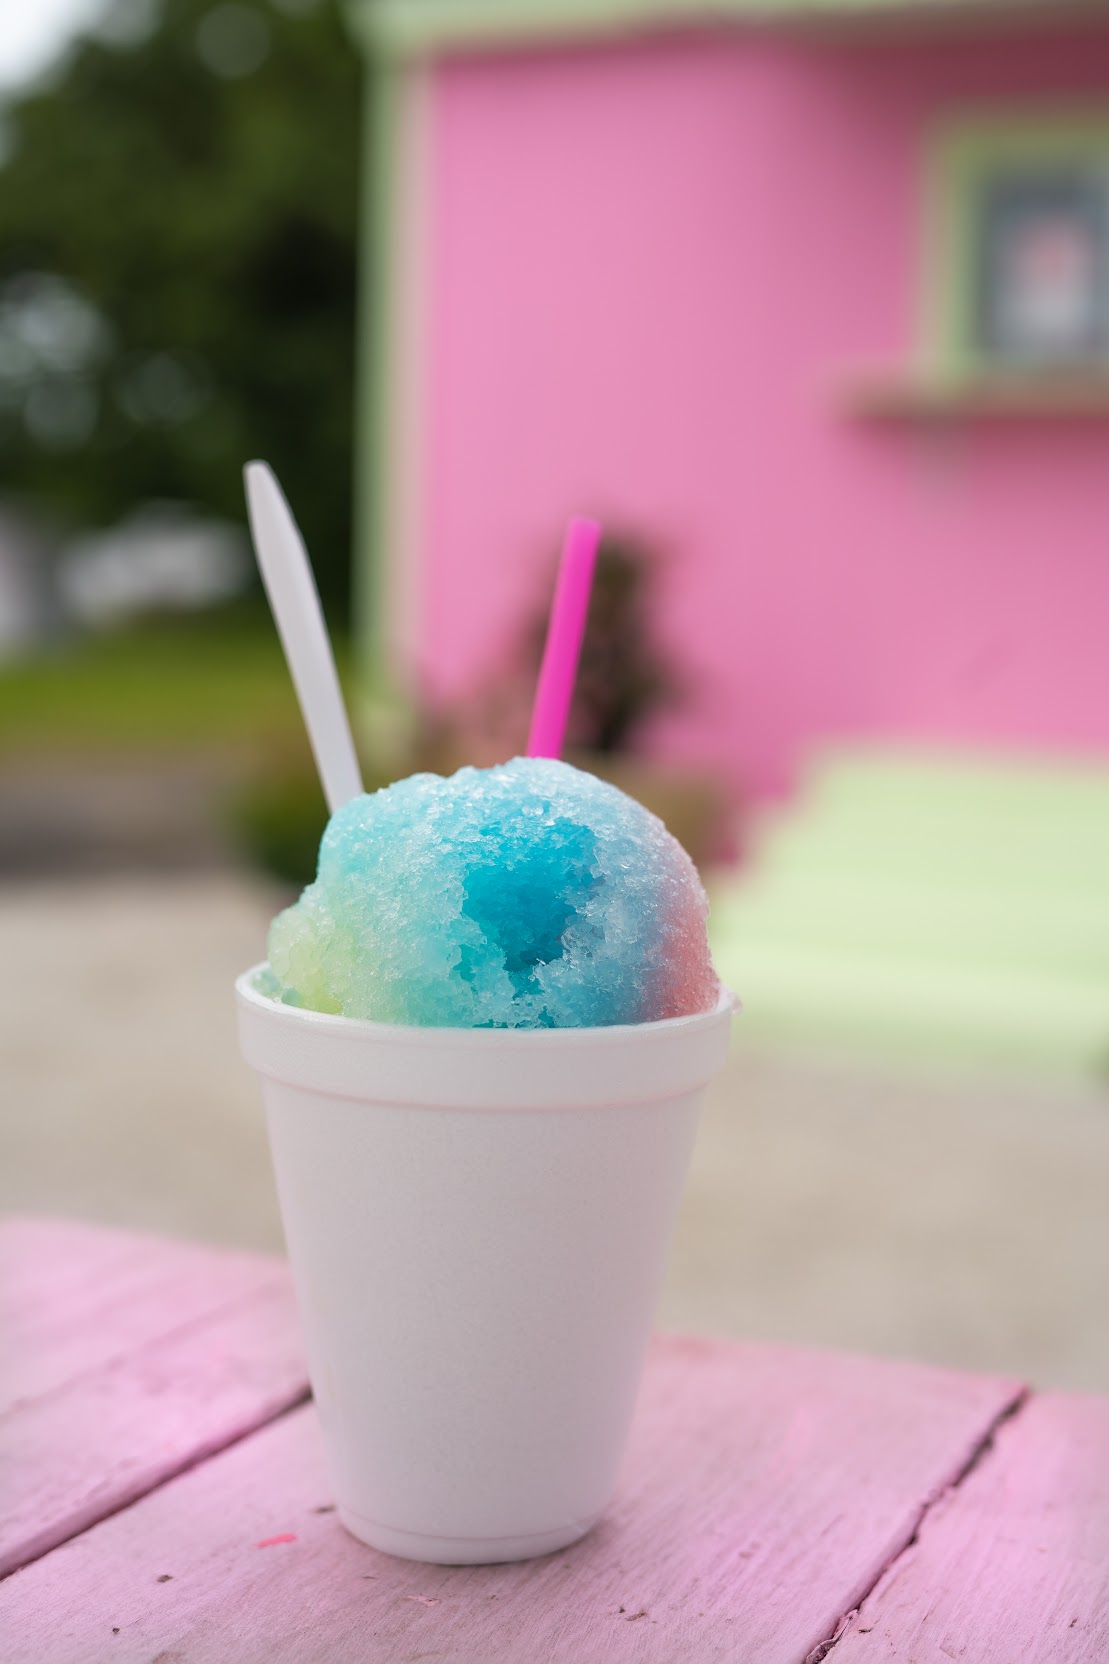 Sulphur Springs offers countless flavors at popular sno cone stands